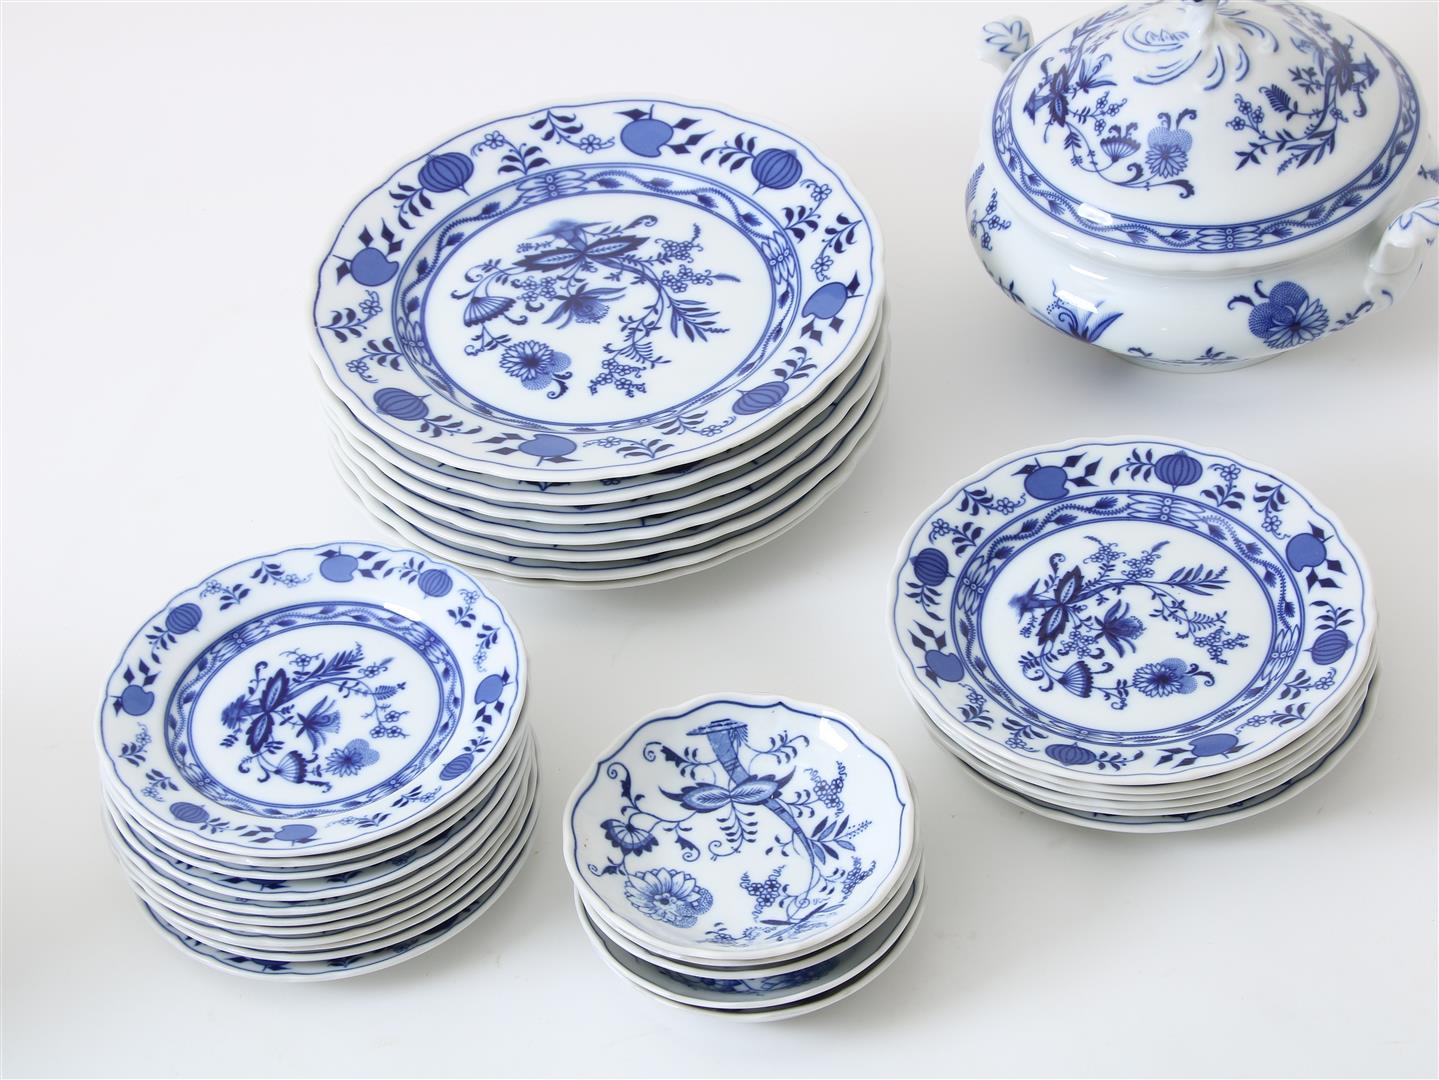 Approximately 50 pieces of porcelain tableware with zwiebelmuster decor, including bowls, - Image 8 of 9